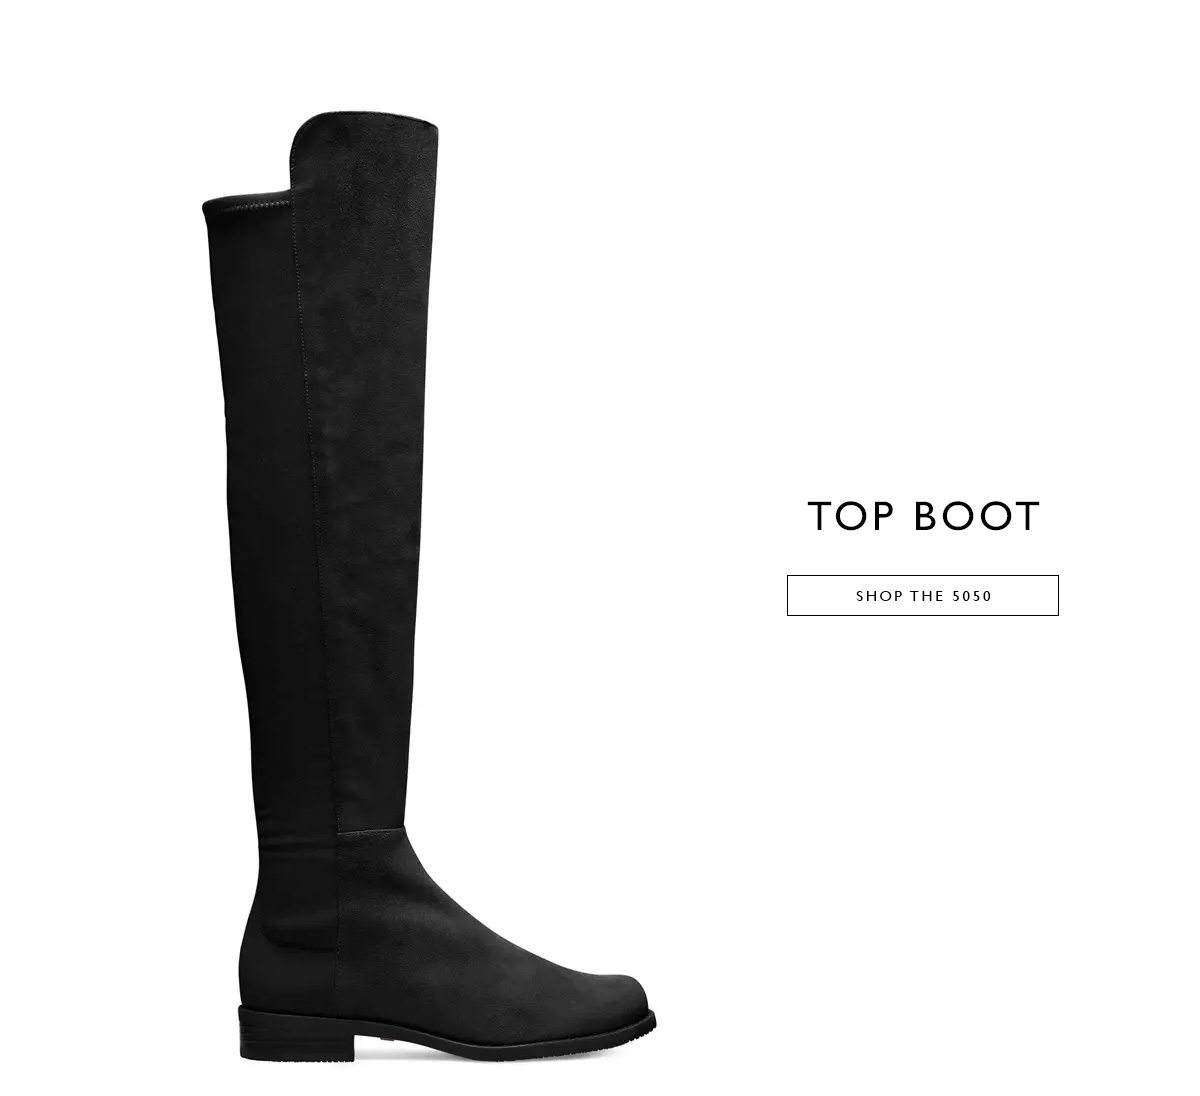 Top Boot. Shop The 5050